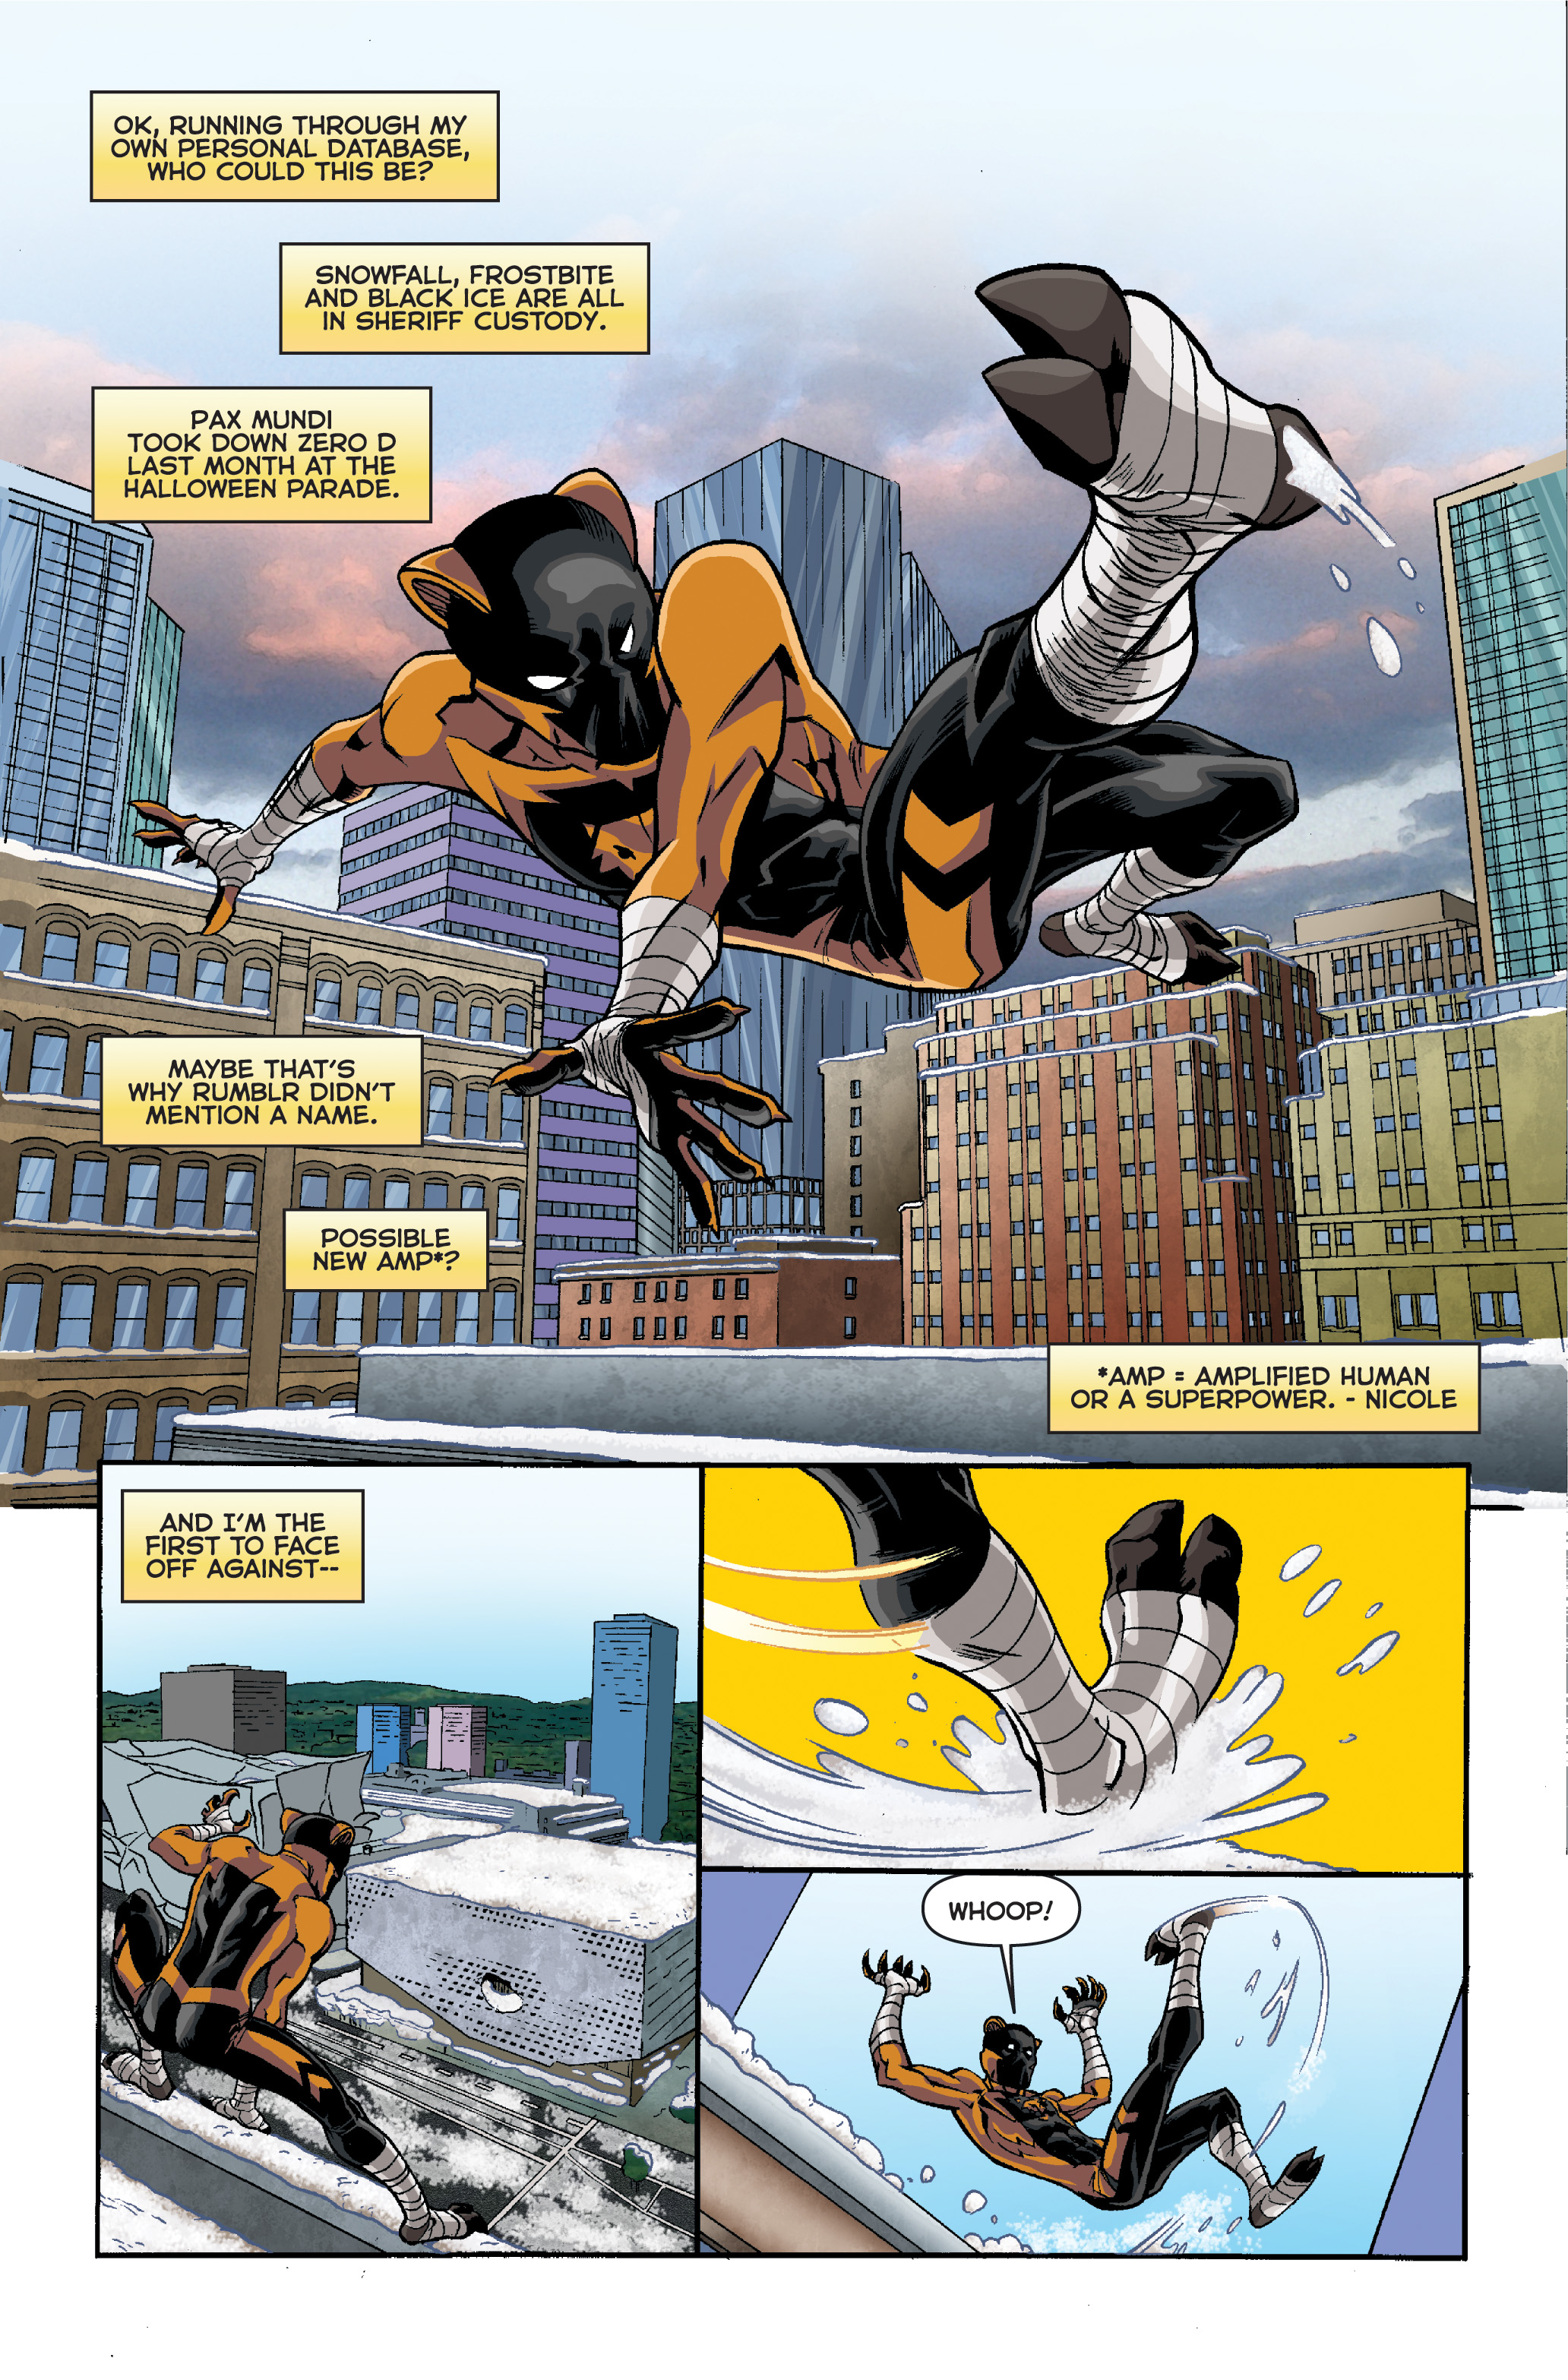 Actionverse #7 Featuring Midnight Tiger Page 6.jpg